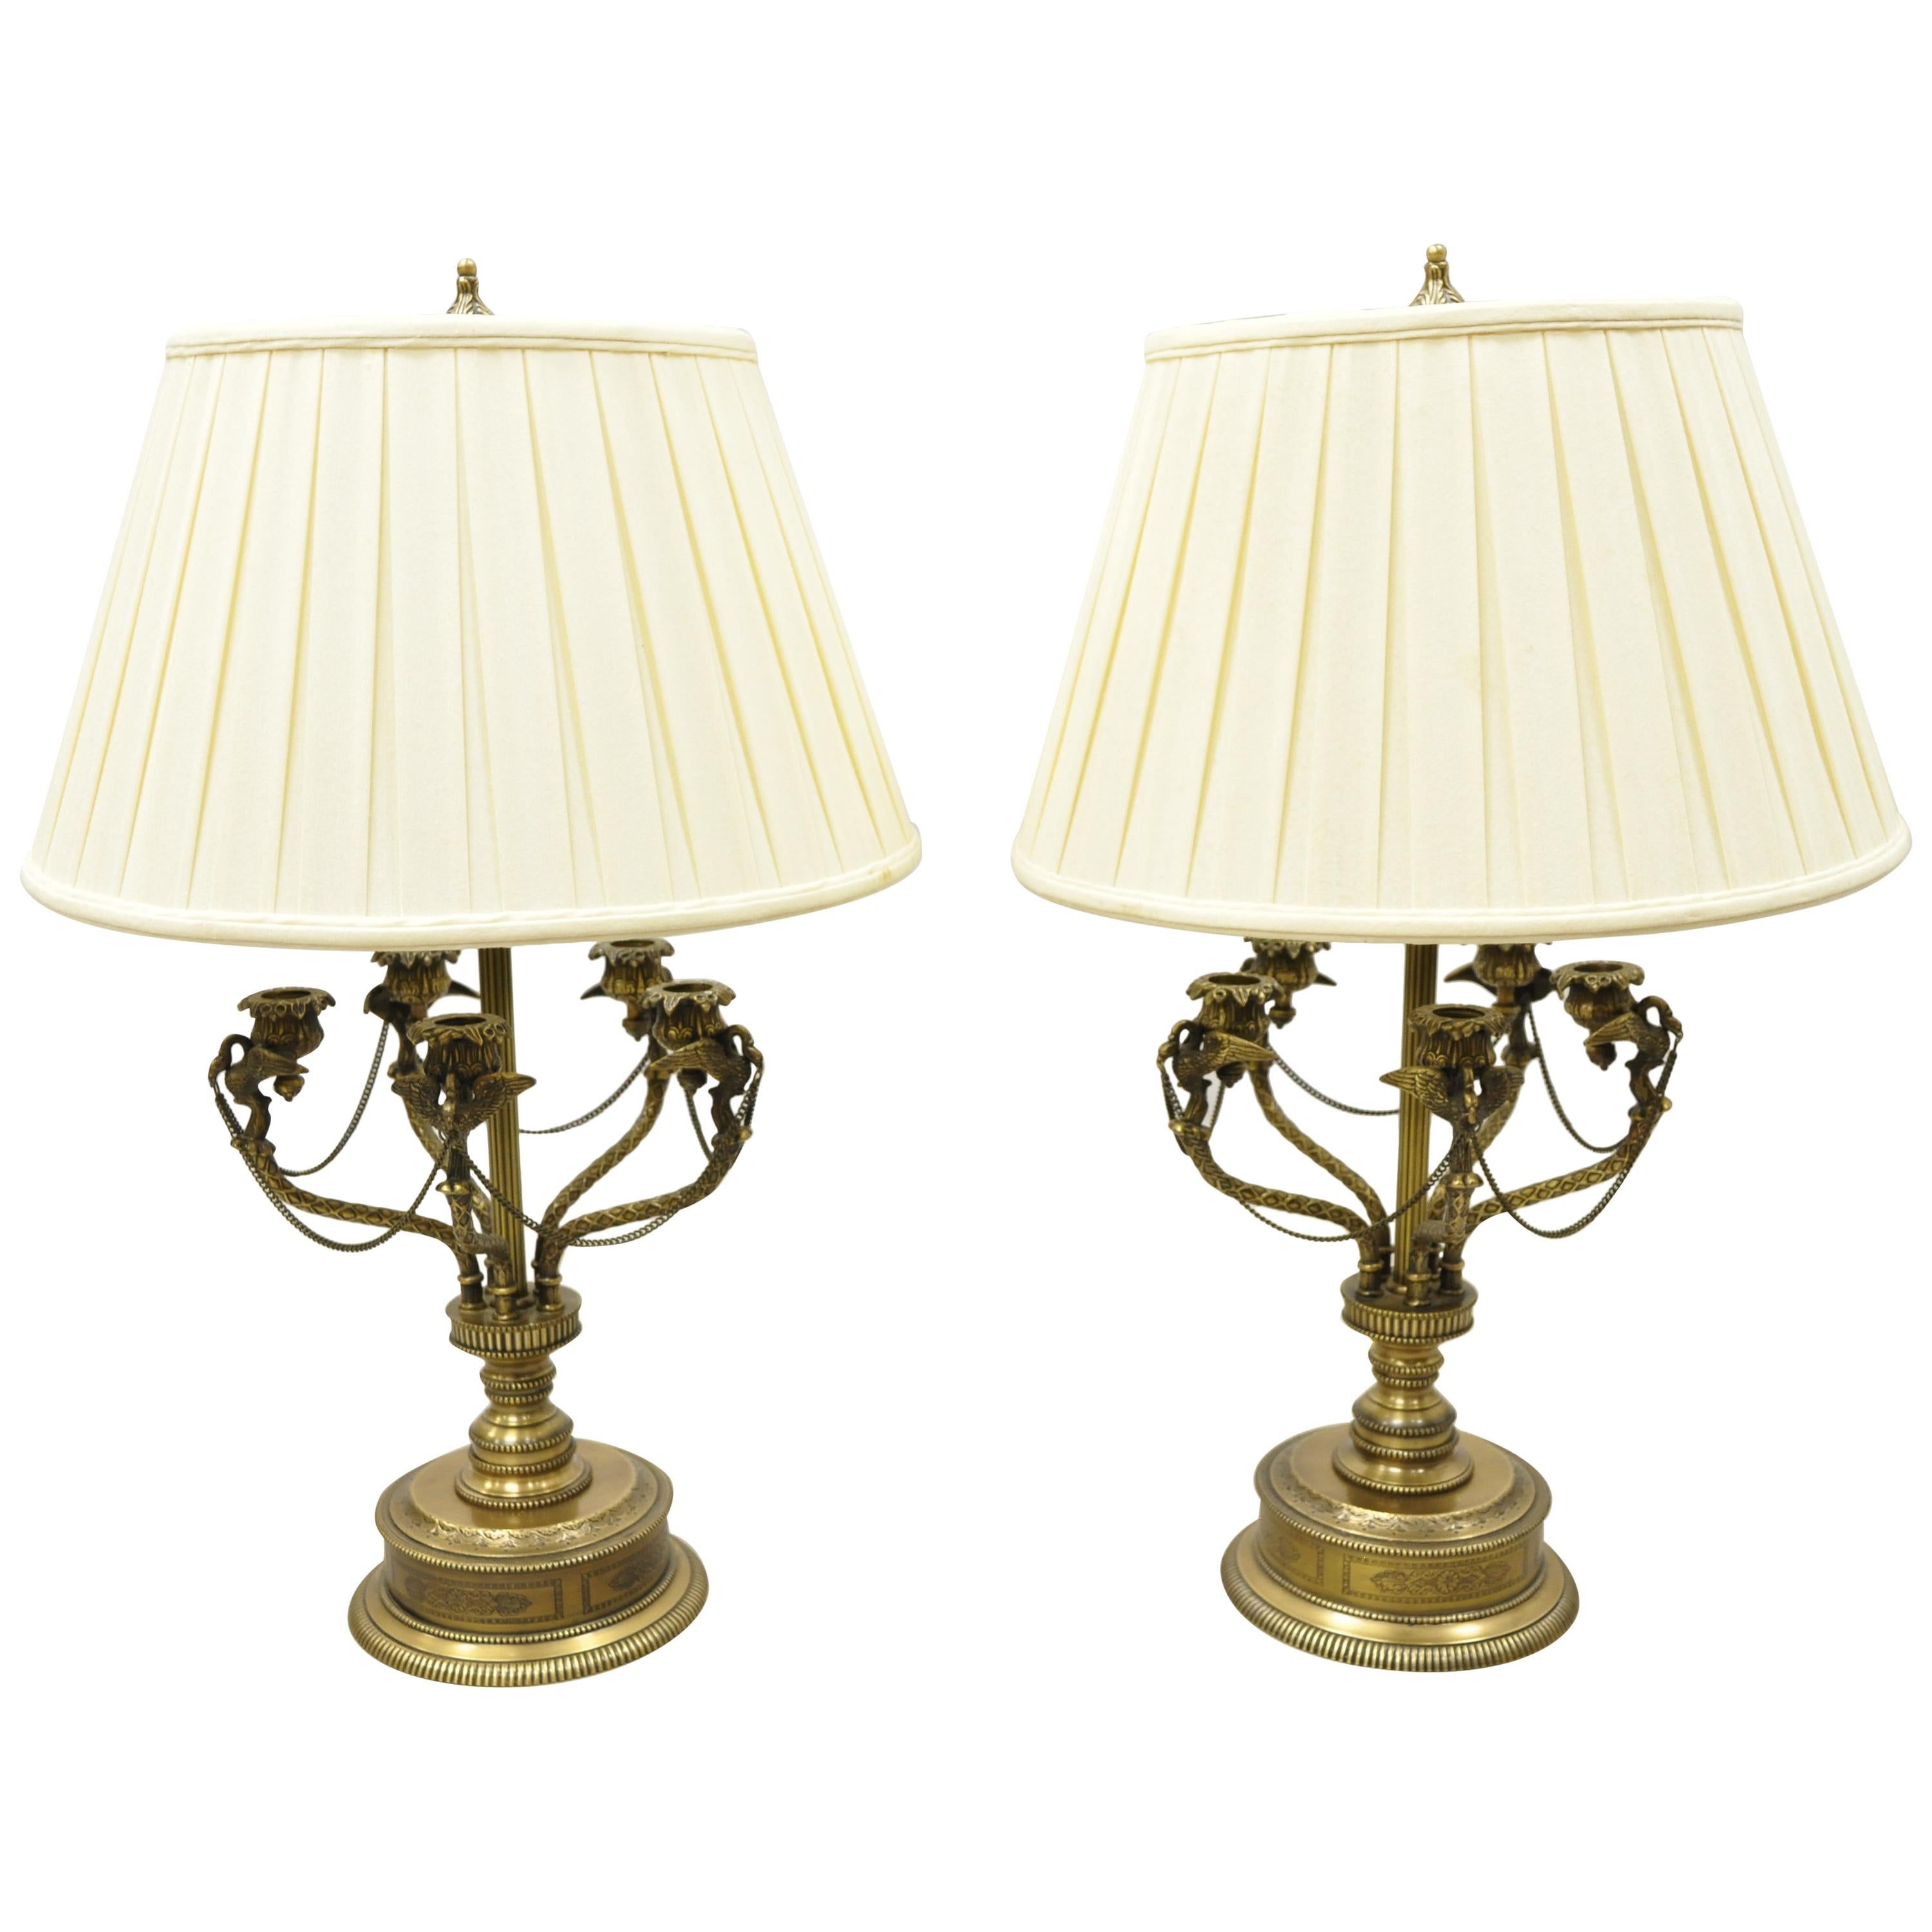 French Empire Style Brass Figural Bird Swan Candelabra Table Lamps, a Pair